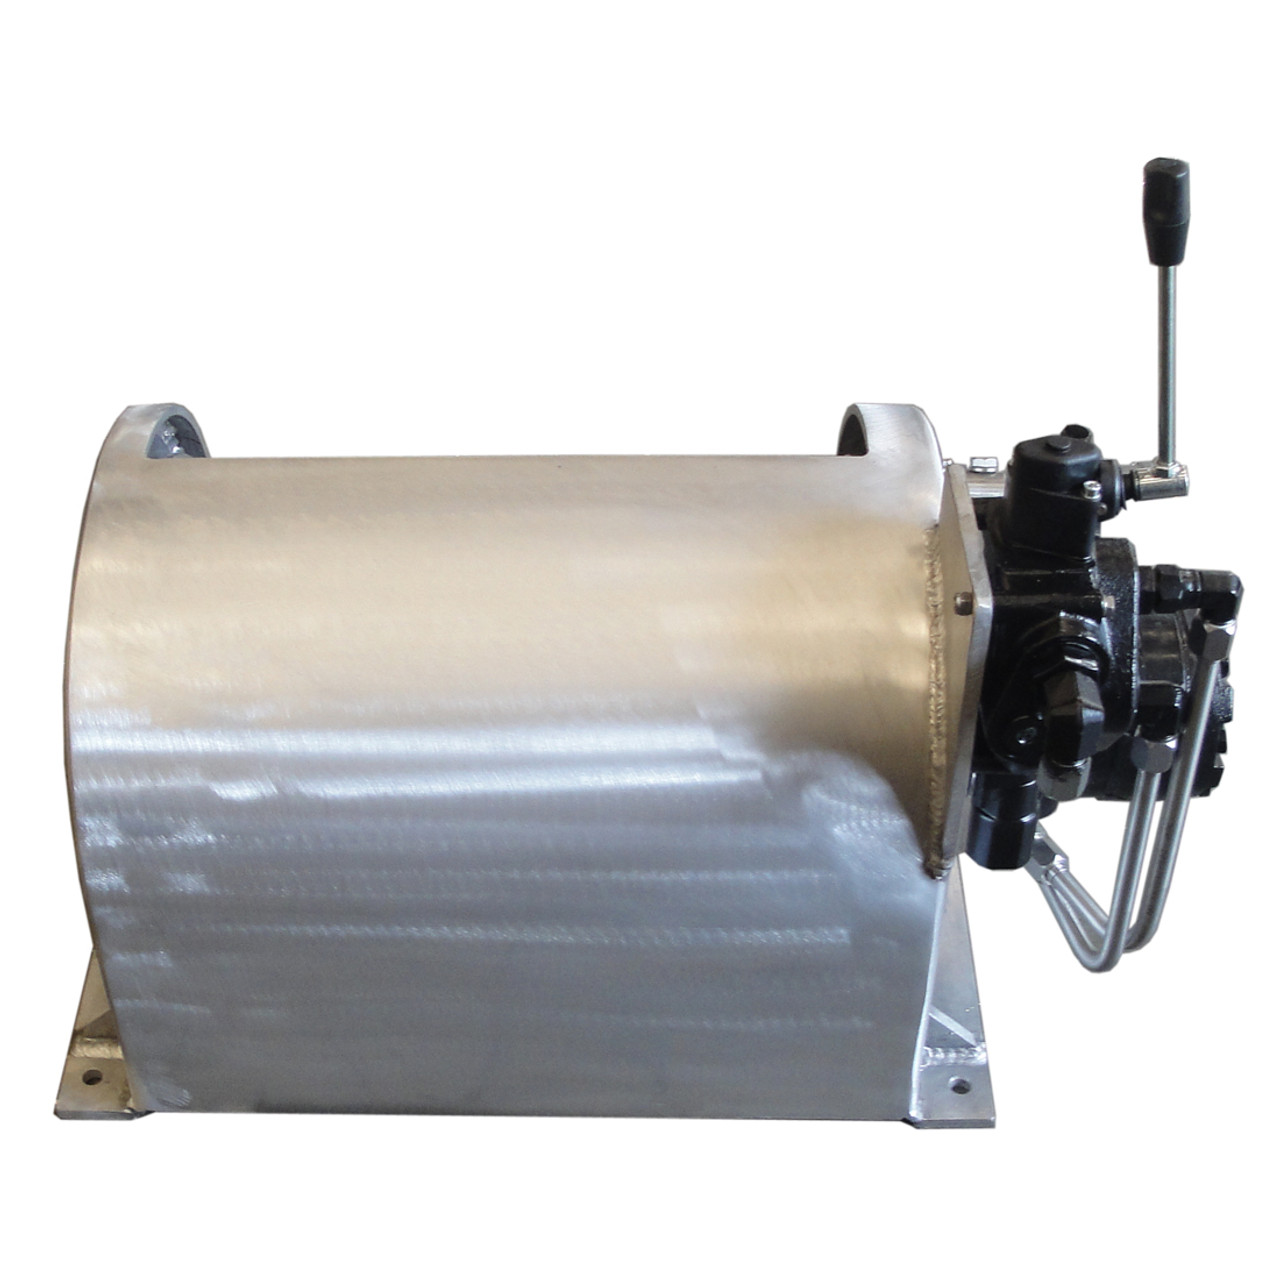 Kolstrand 12 Inch Anchor Winch - With 12 In Diameter X 16 In Wide Drum